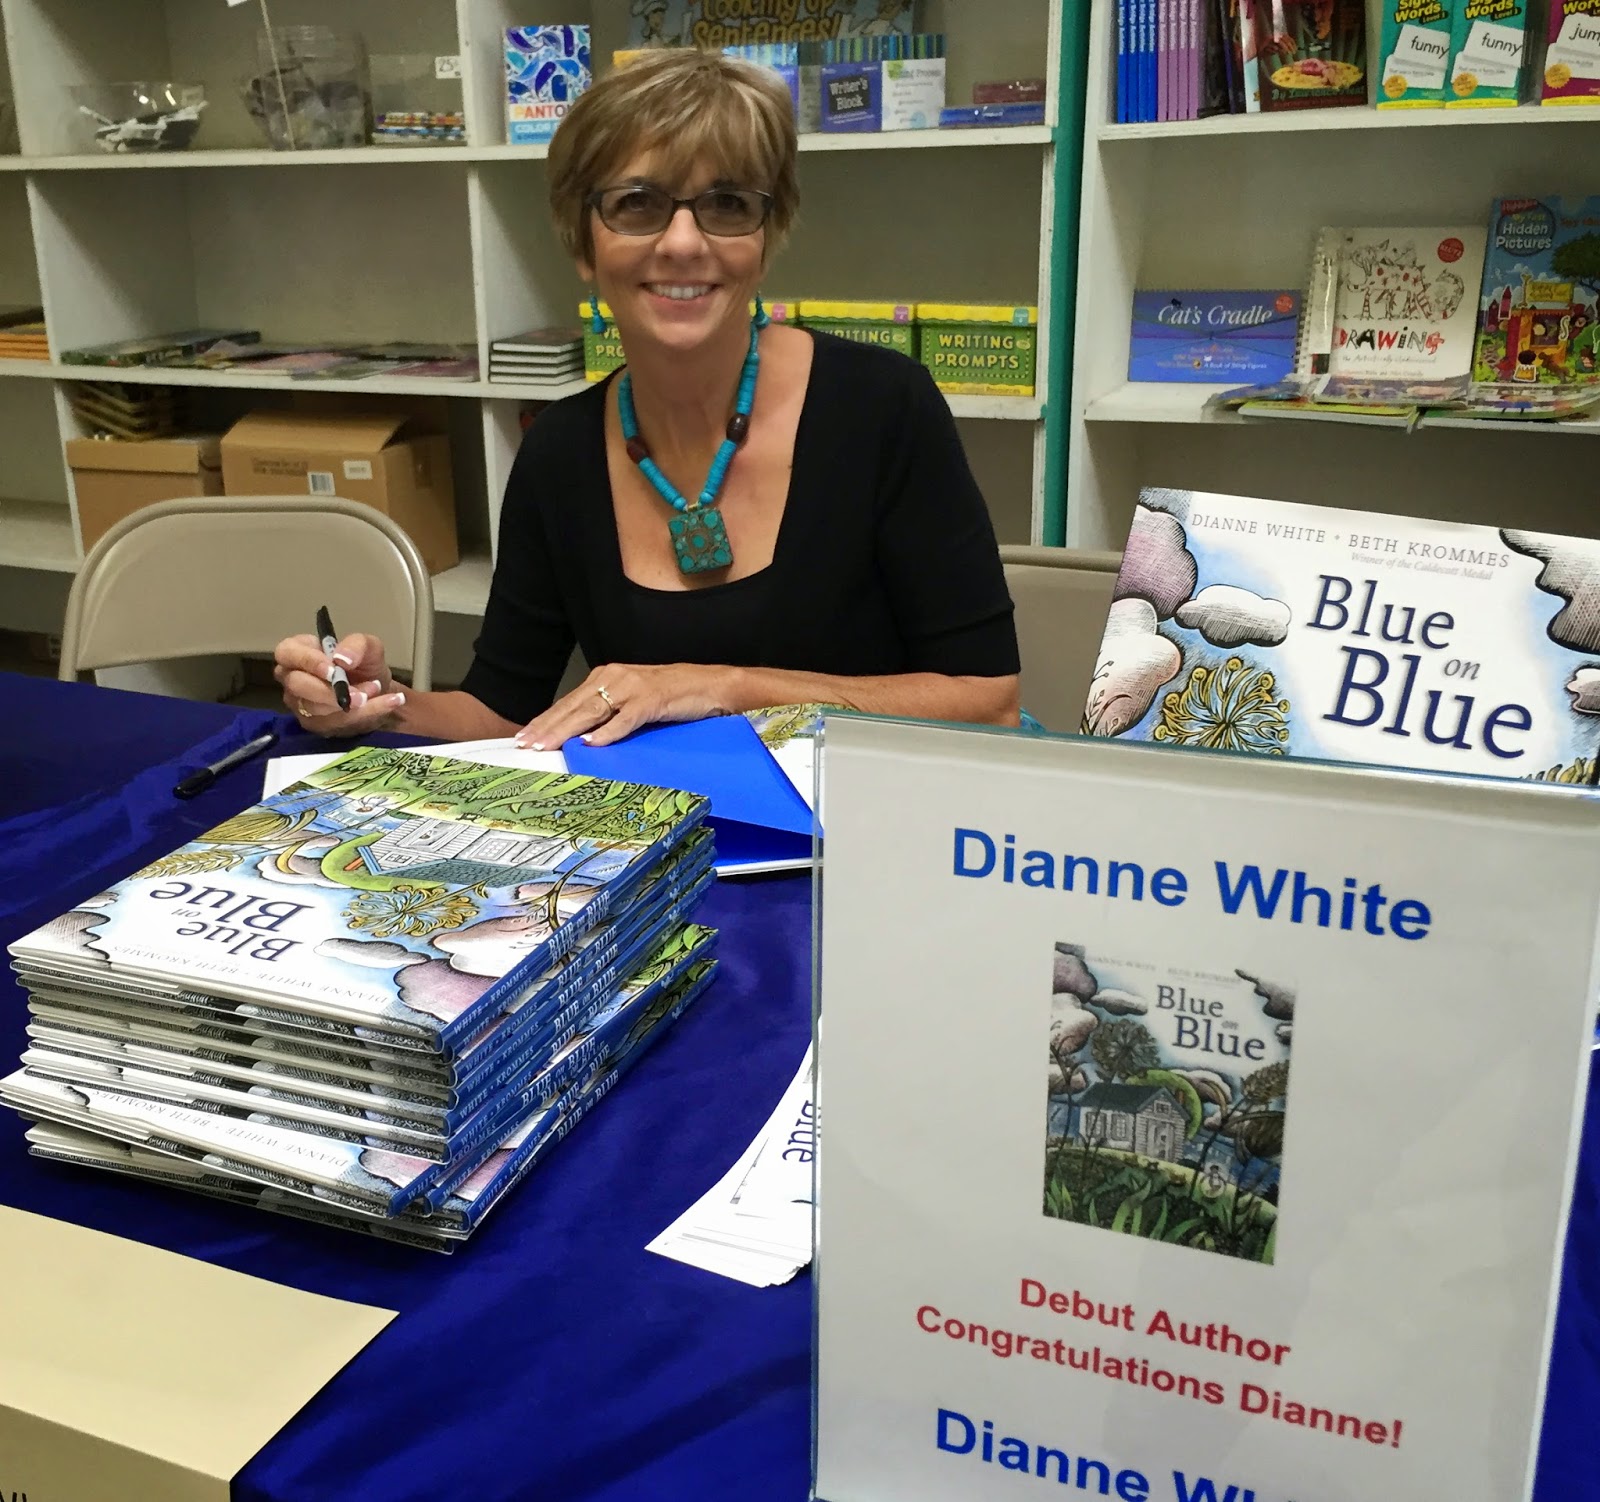 Guest Post & Giveaway: Dianne White on Doing the Work & Not Giving Up